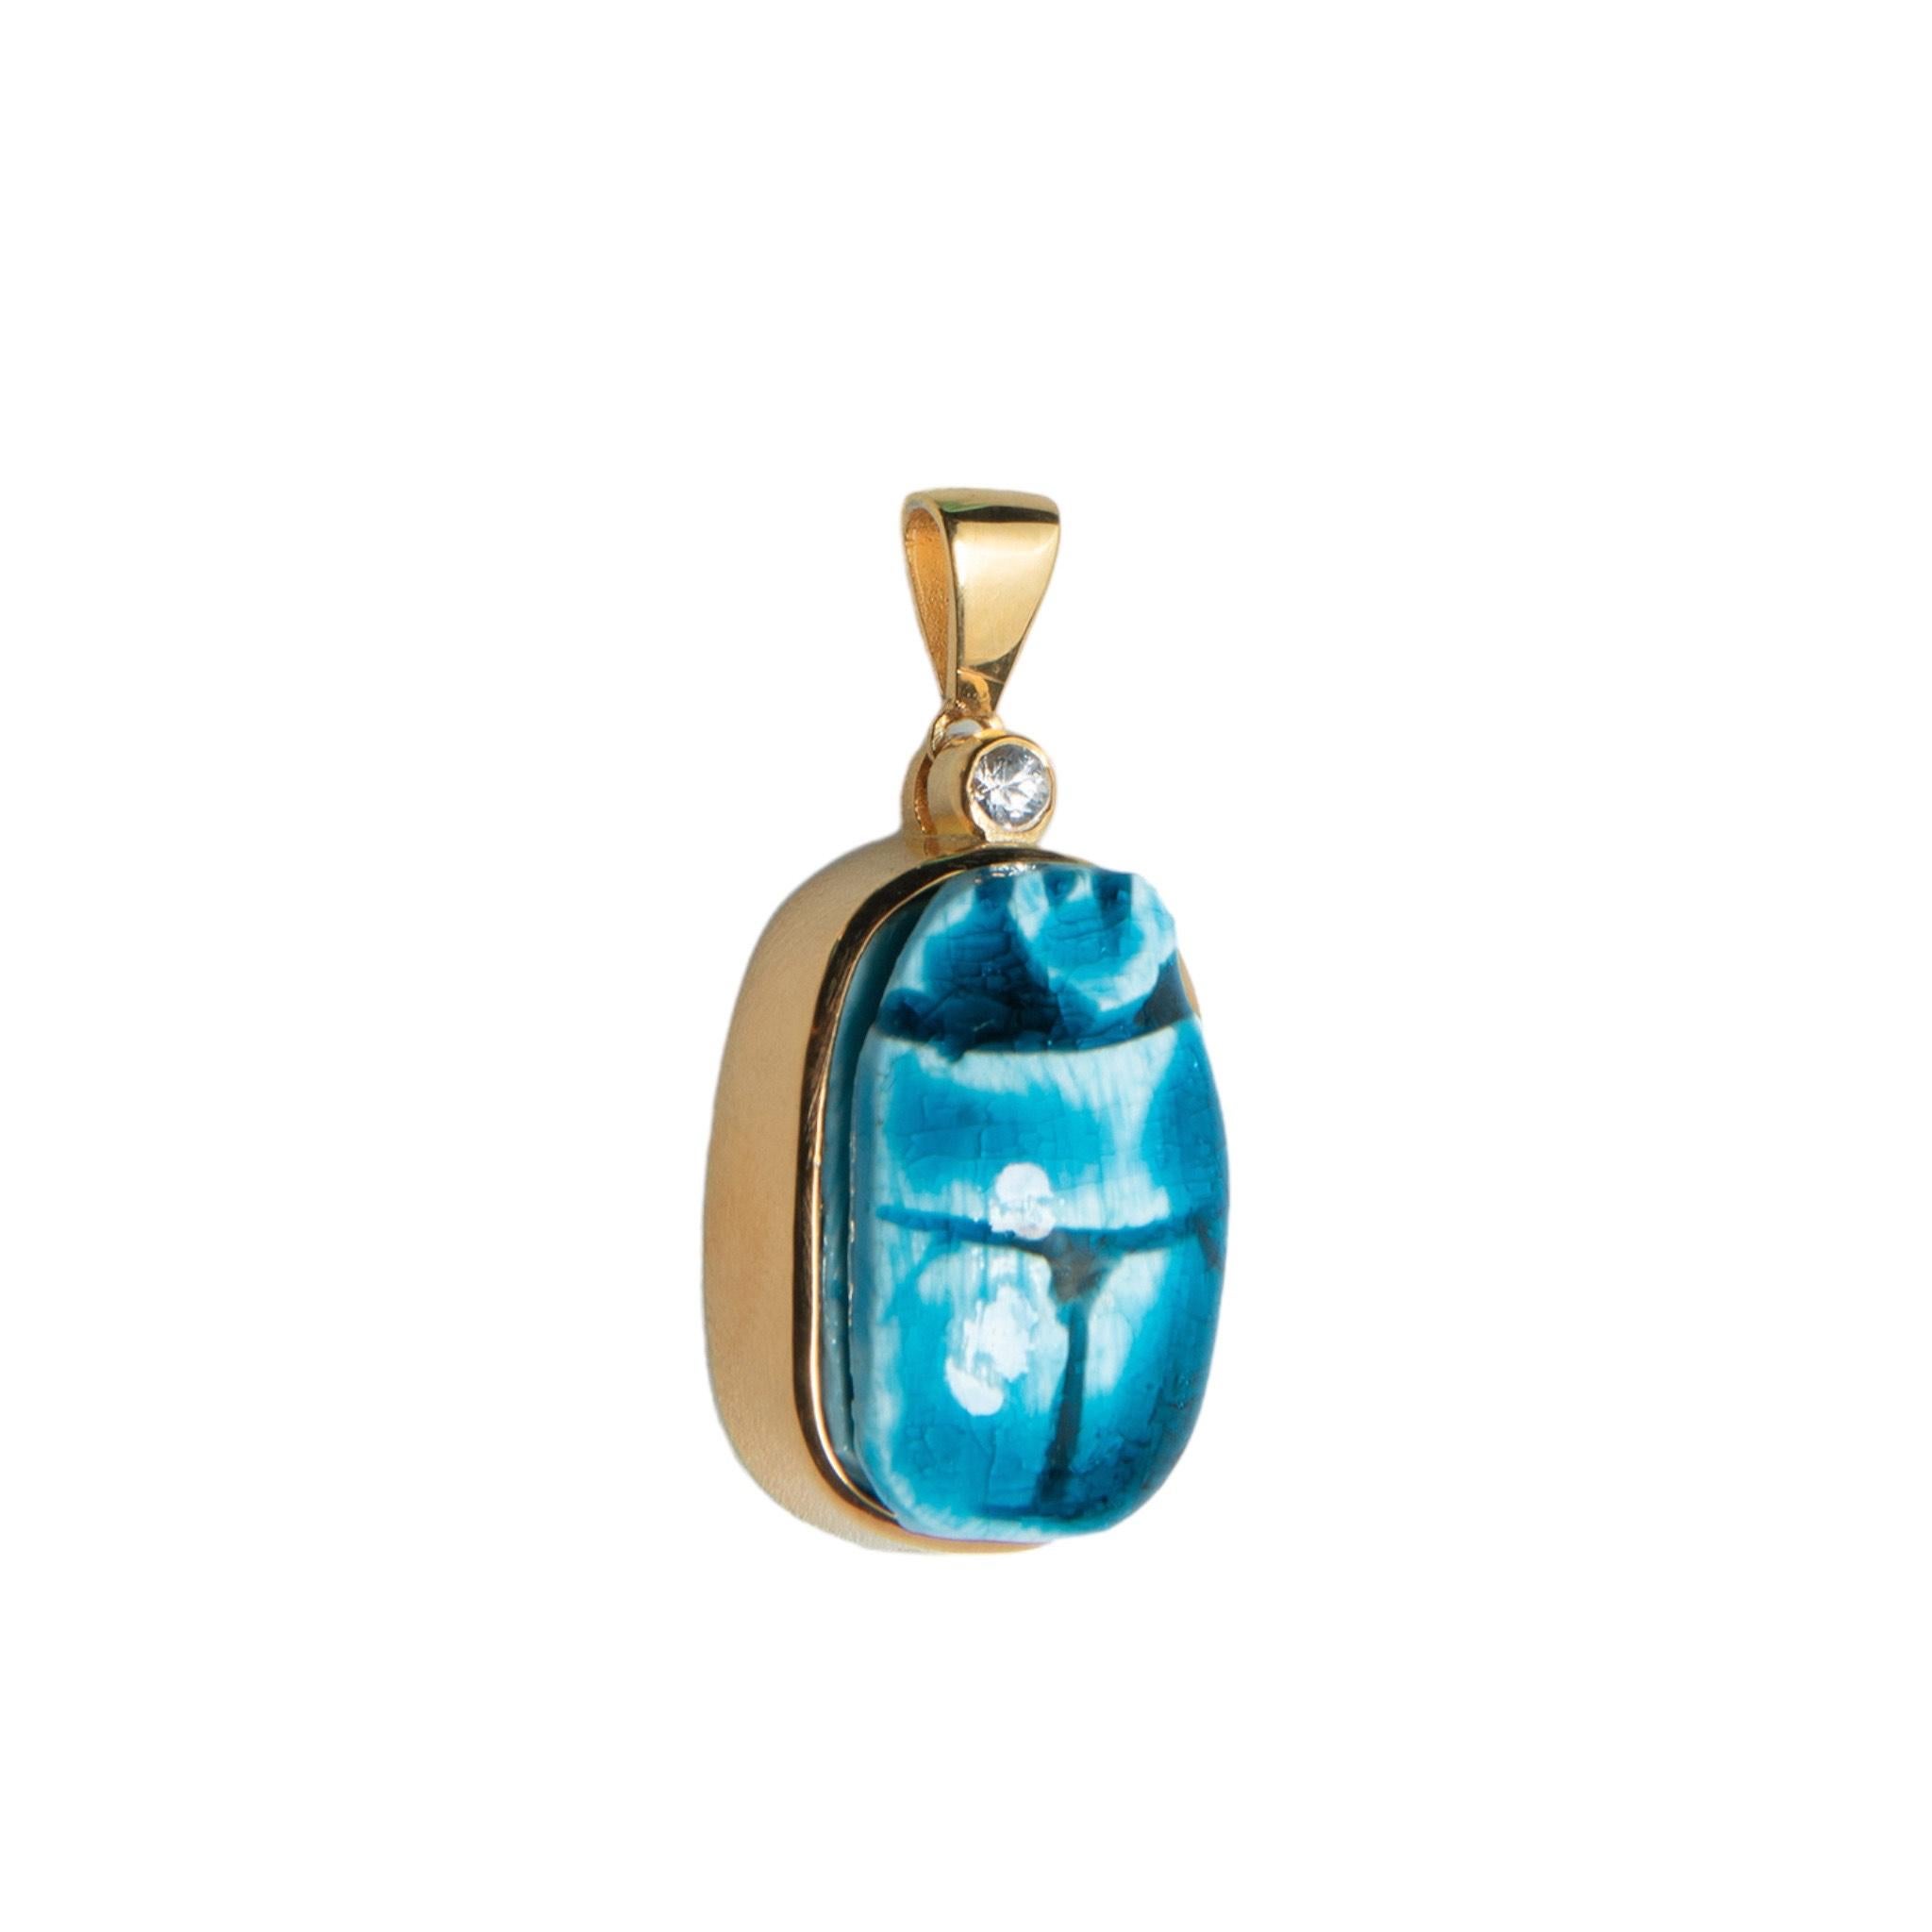 Women's or Men's House of Sol Gold filled Silver Scarab Charm with Sapphire For Sale